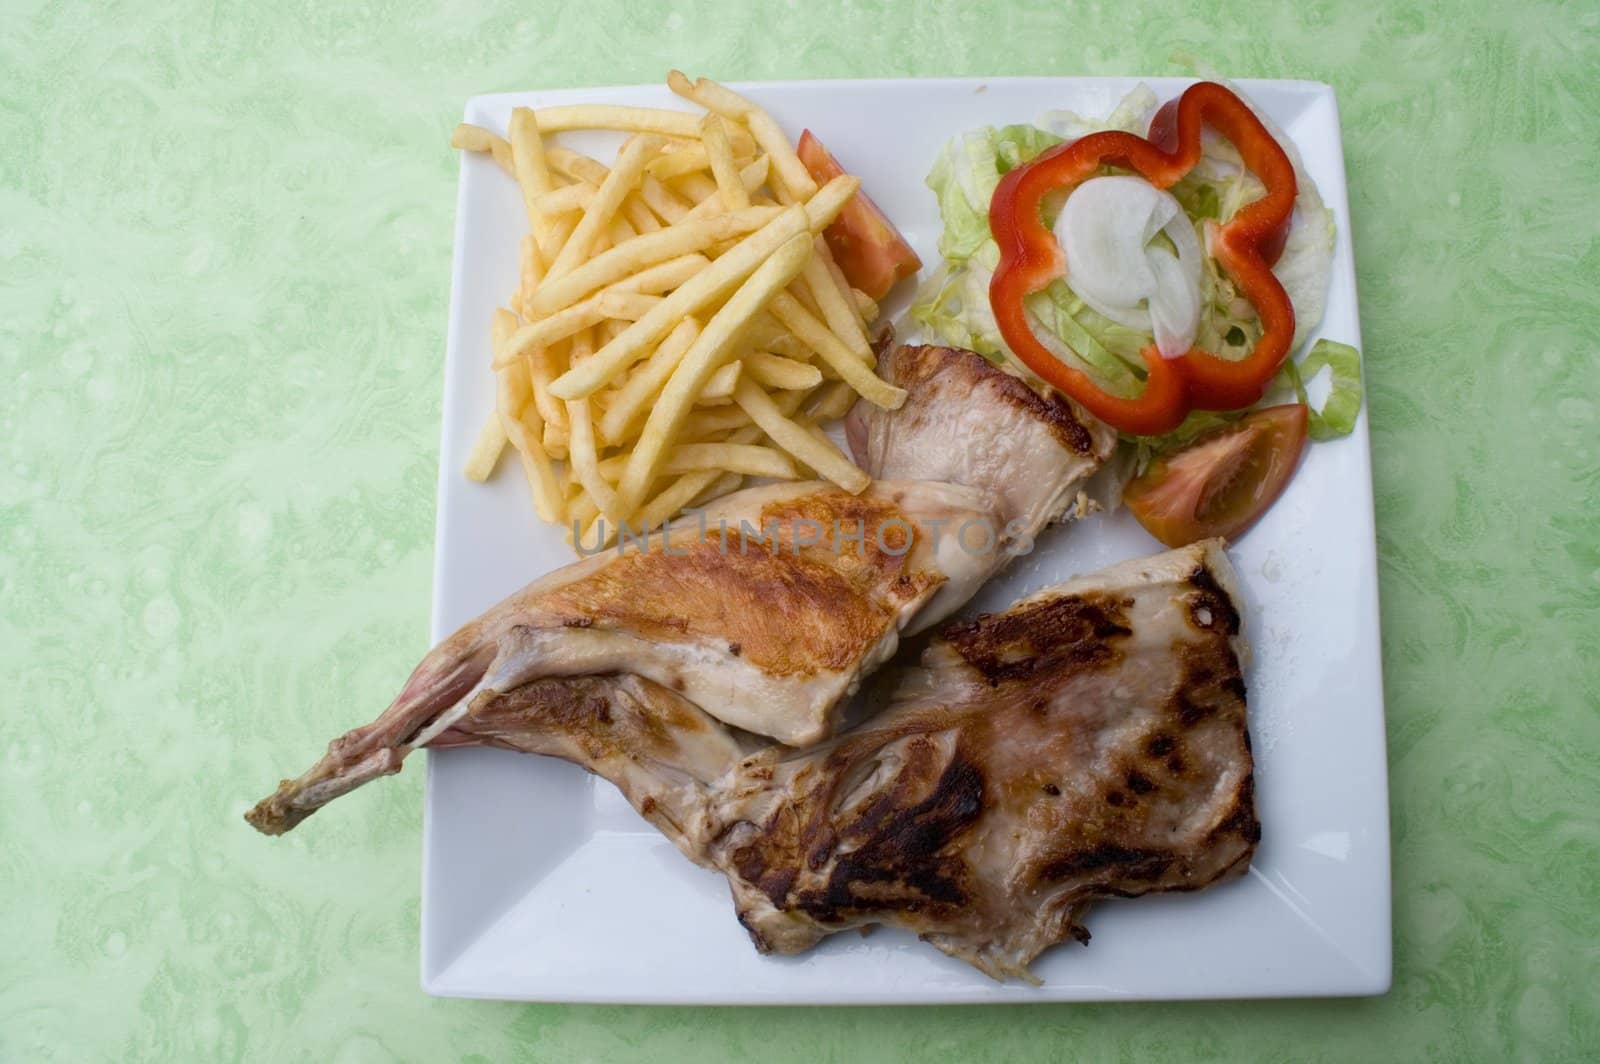 plate of steak with chips and vegetables